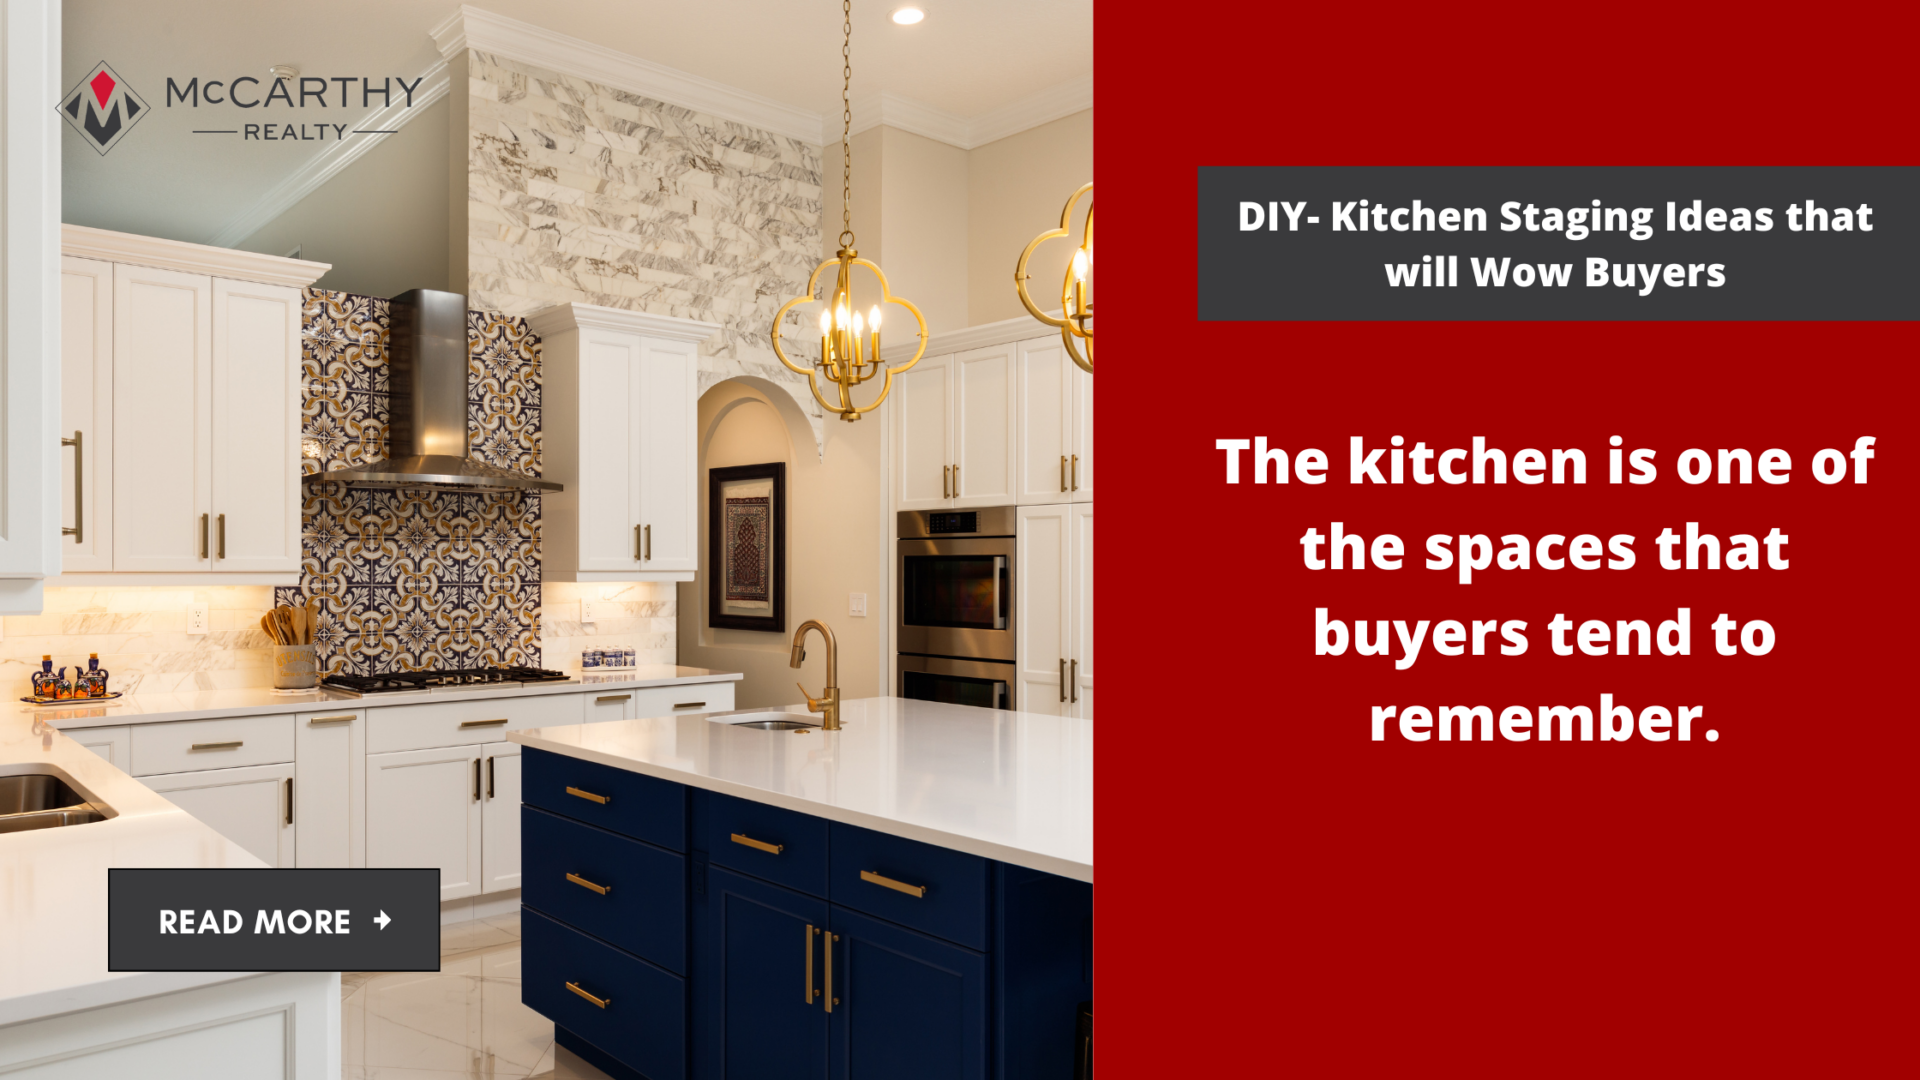 DIY- Kitchen Staging Ideas that will Wow Buyers